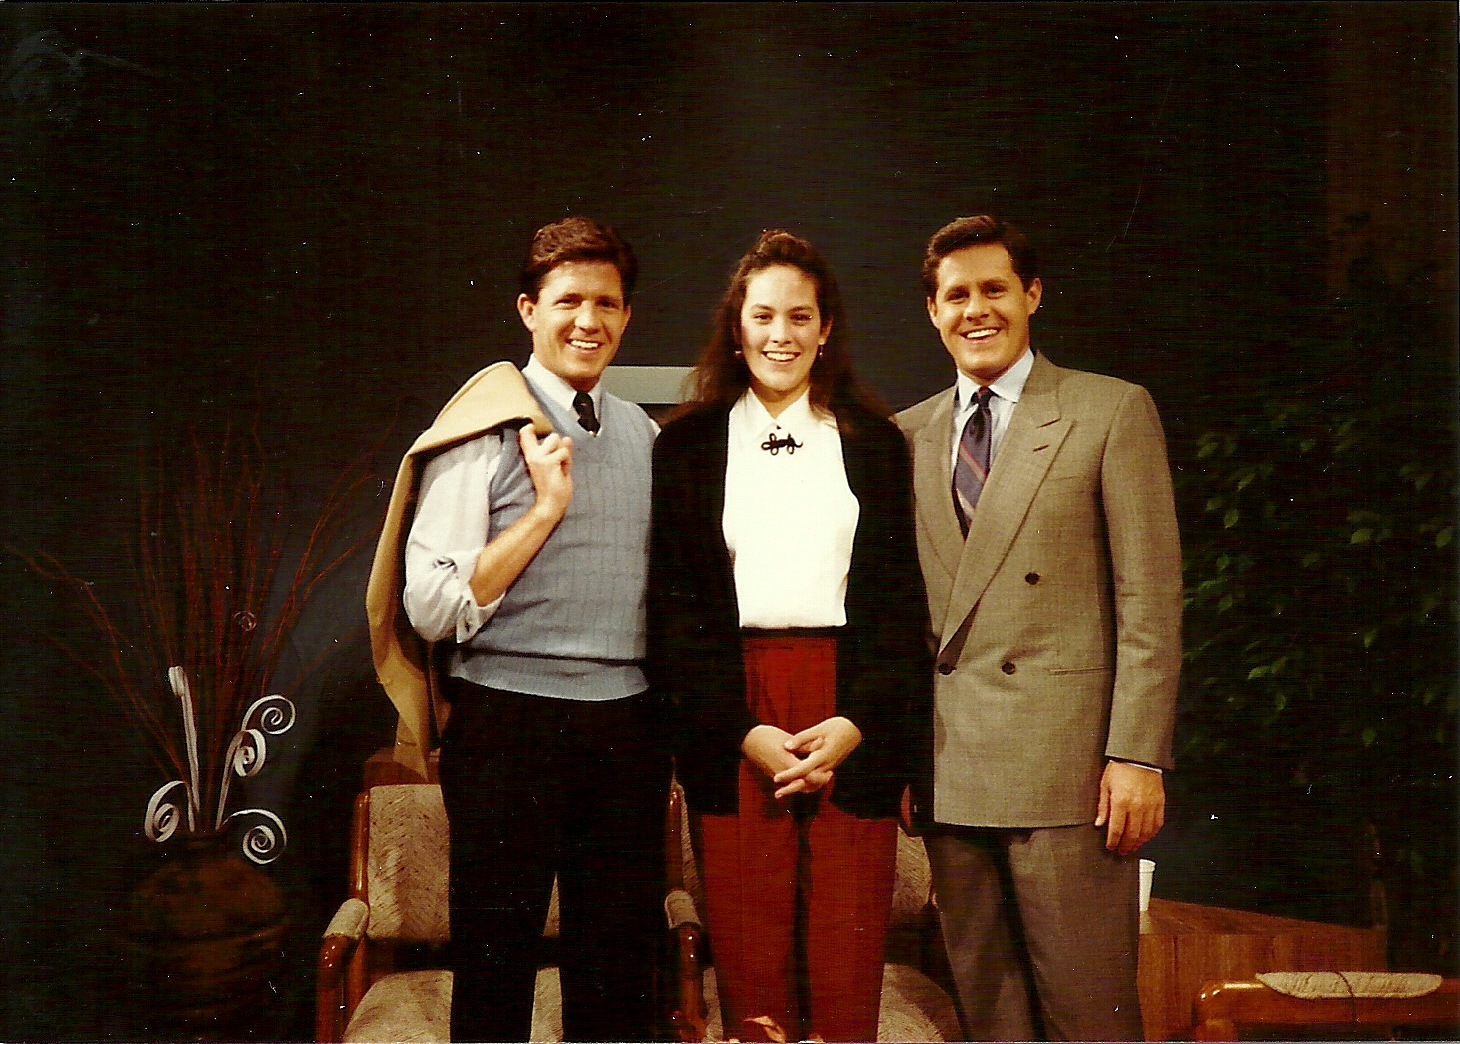 Anna Beth Gish with the McCain Brothers on their morning show in Oklahoma City.